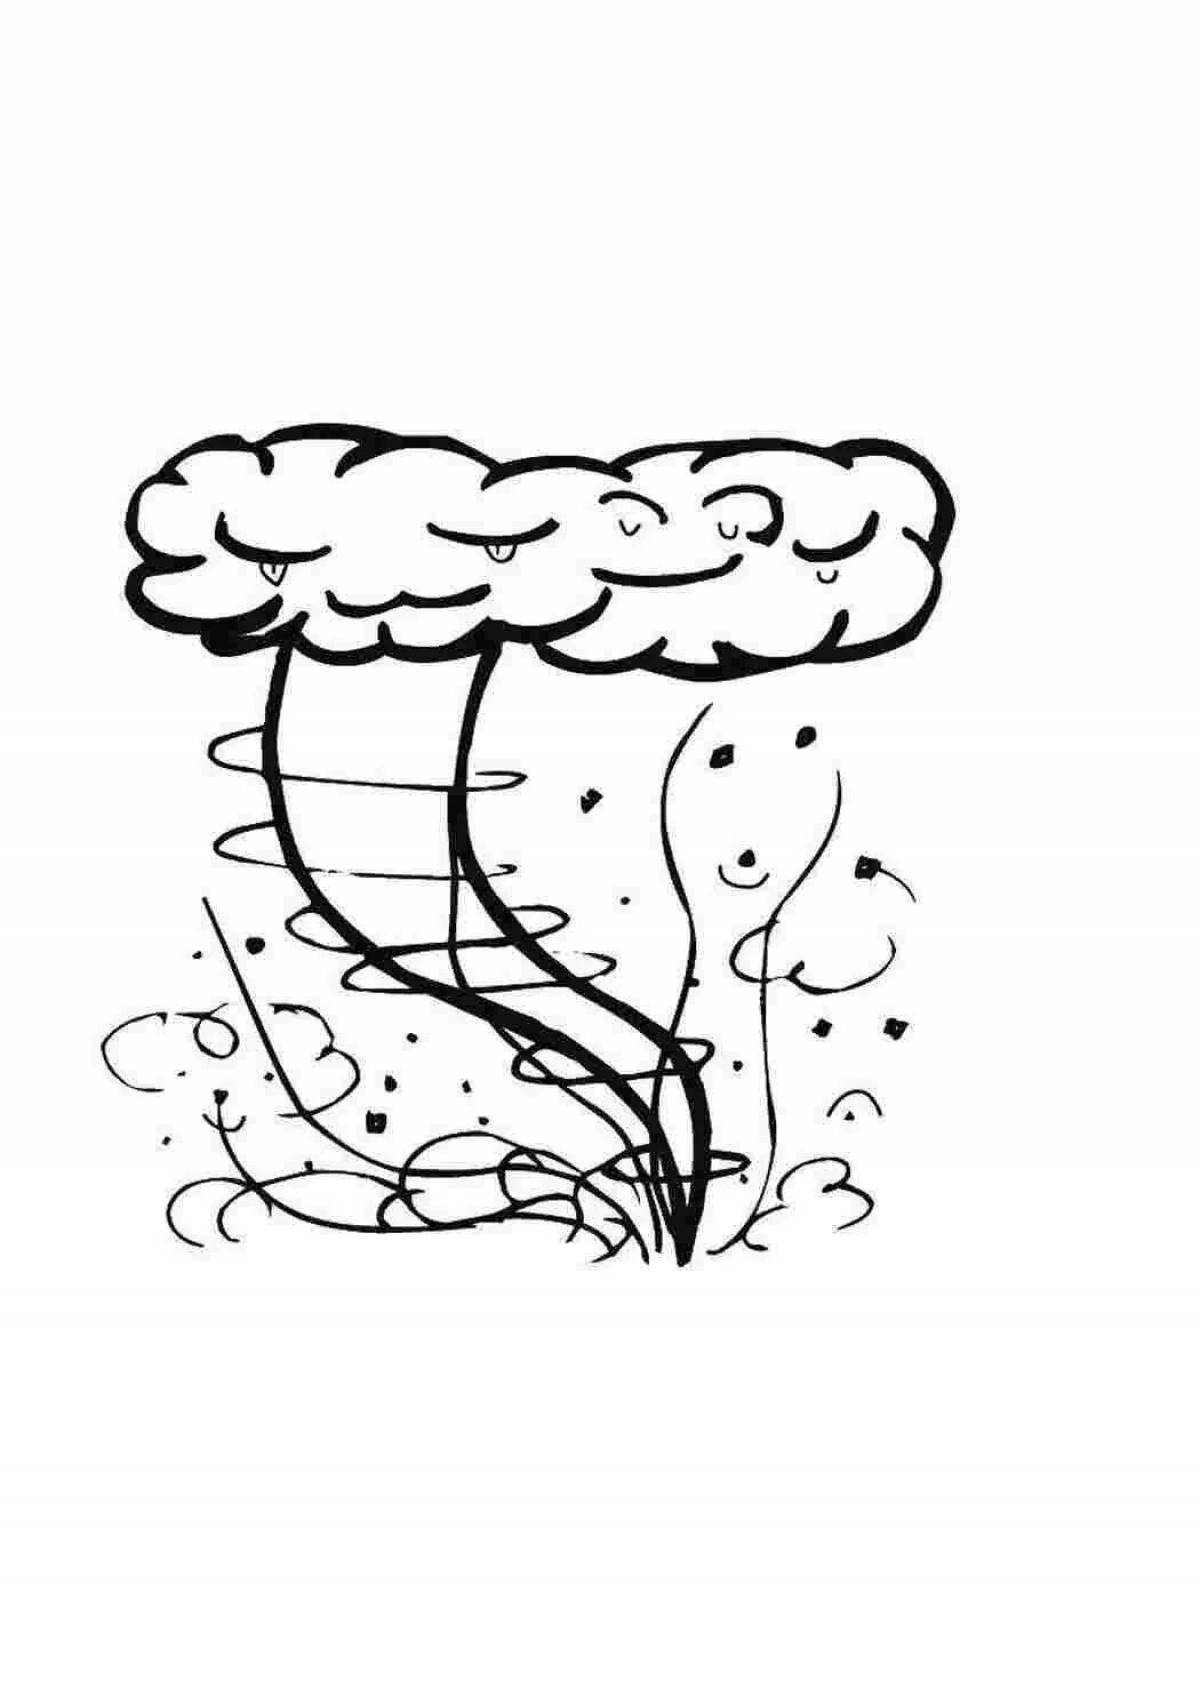 Coloring book exciting wind for kids